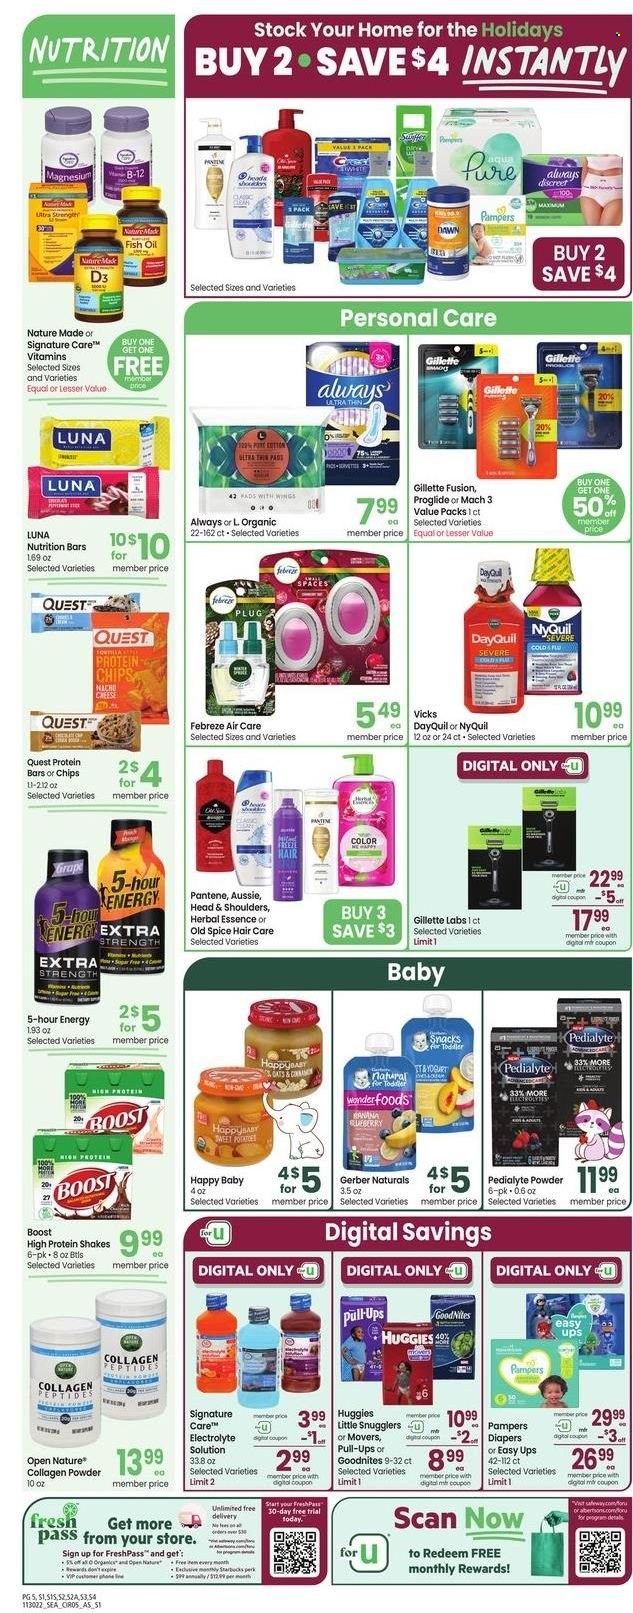 thumbnail - Safeway Flyer - 11/30/2022 - 12/06/2022 - Sales products - sweet potato, potatoes, cheese, yoghurt, protein drink, shake, snack, Gerber, chips, nutrition bar, protein bar, spice, oil, Boost, Starbucks, Febreze, Old Spice, Signal, Always pads, Always Discreet, Aussie, Head & Shoulders, Pantene, Gillette, fork, mug, DayQuil, Cold & Flu, fish oil, magnesium, Nature Made, NyQuil, Vicks, vitamin D3, Huggies. Page 5.